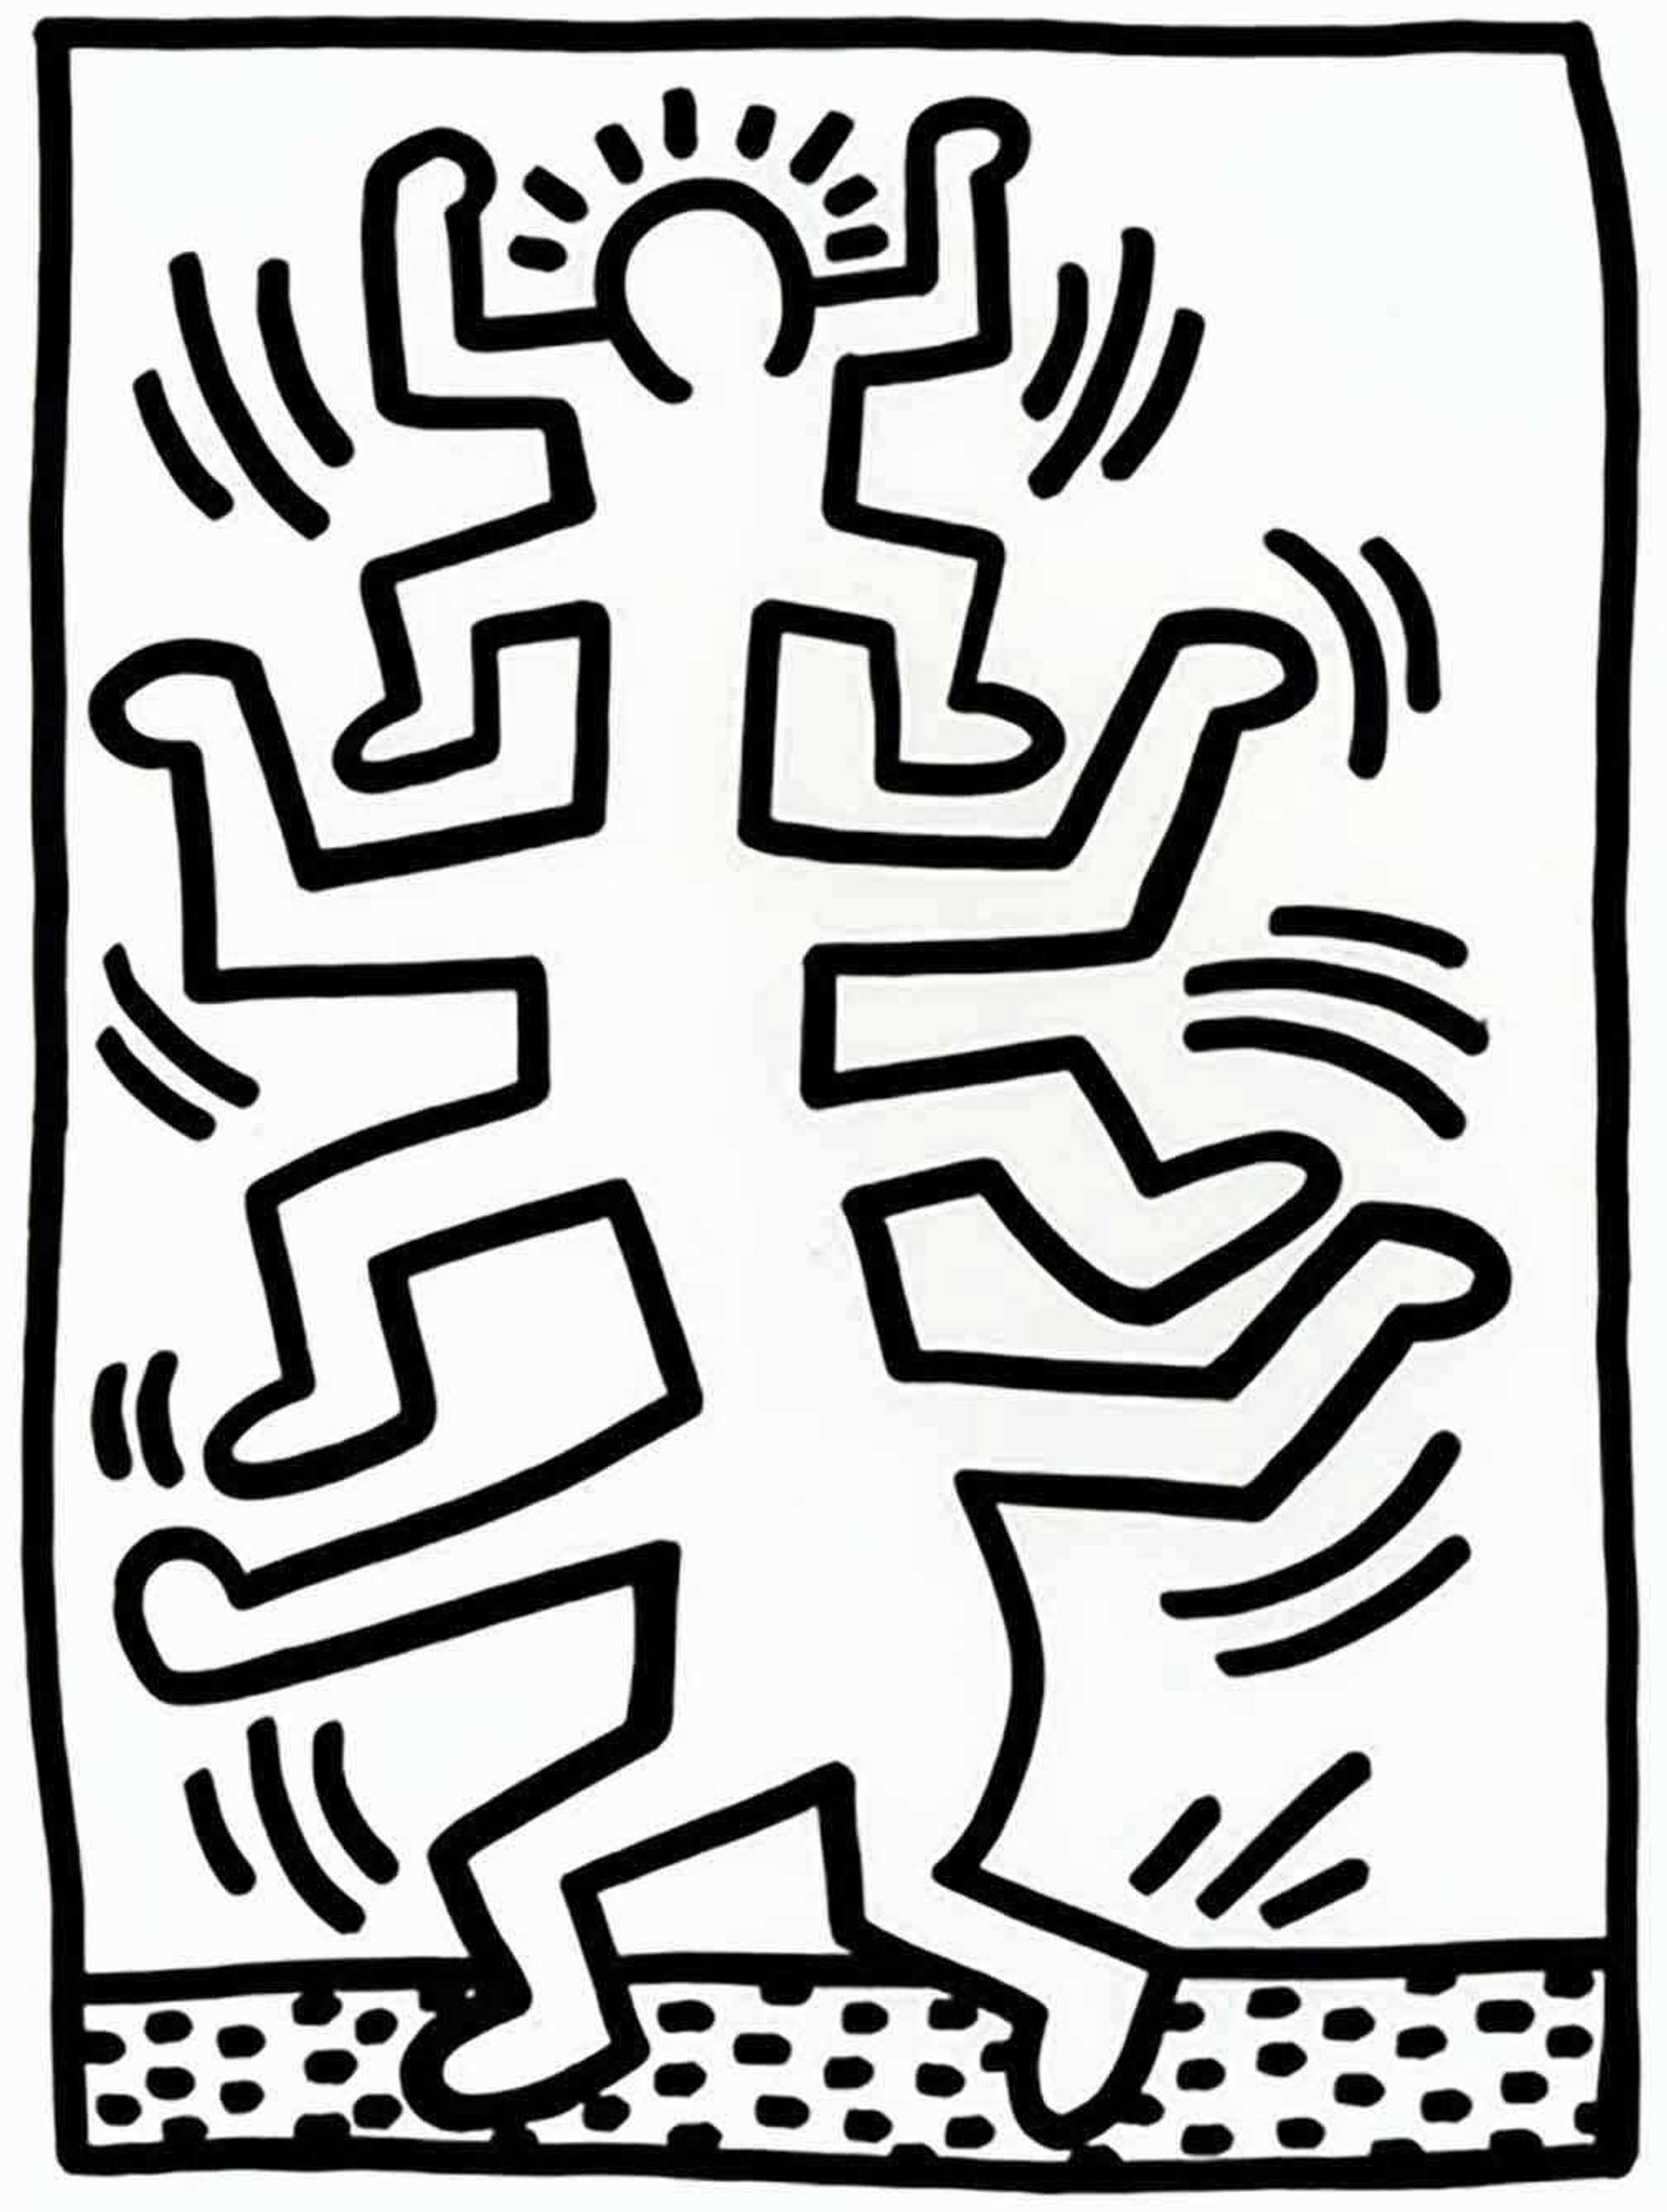 Growing 1 (First State) by Keith Haring